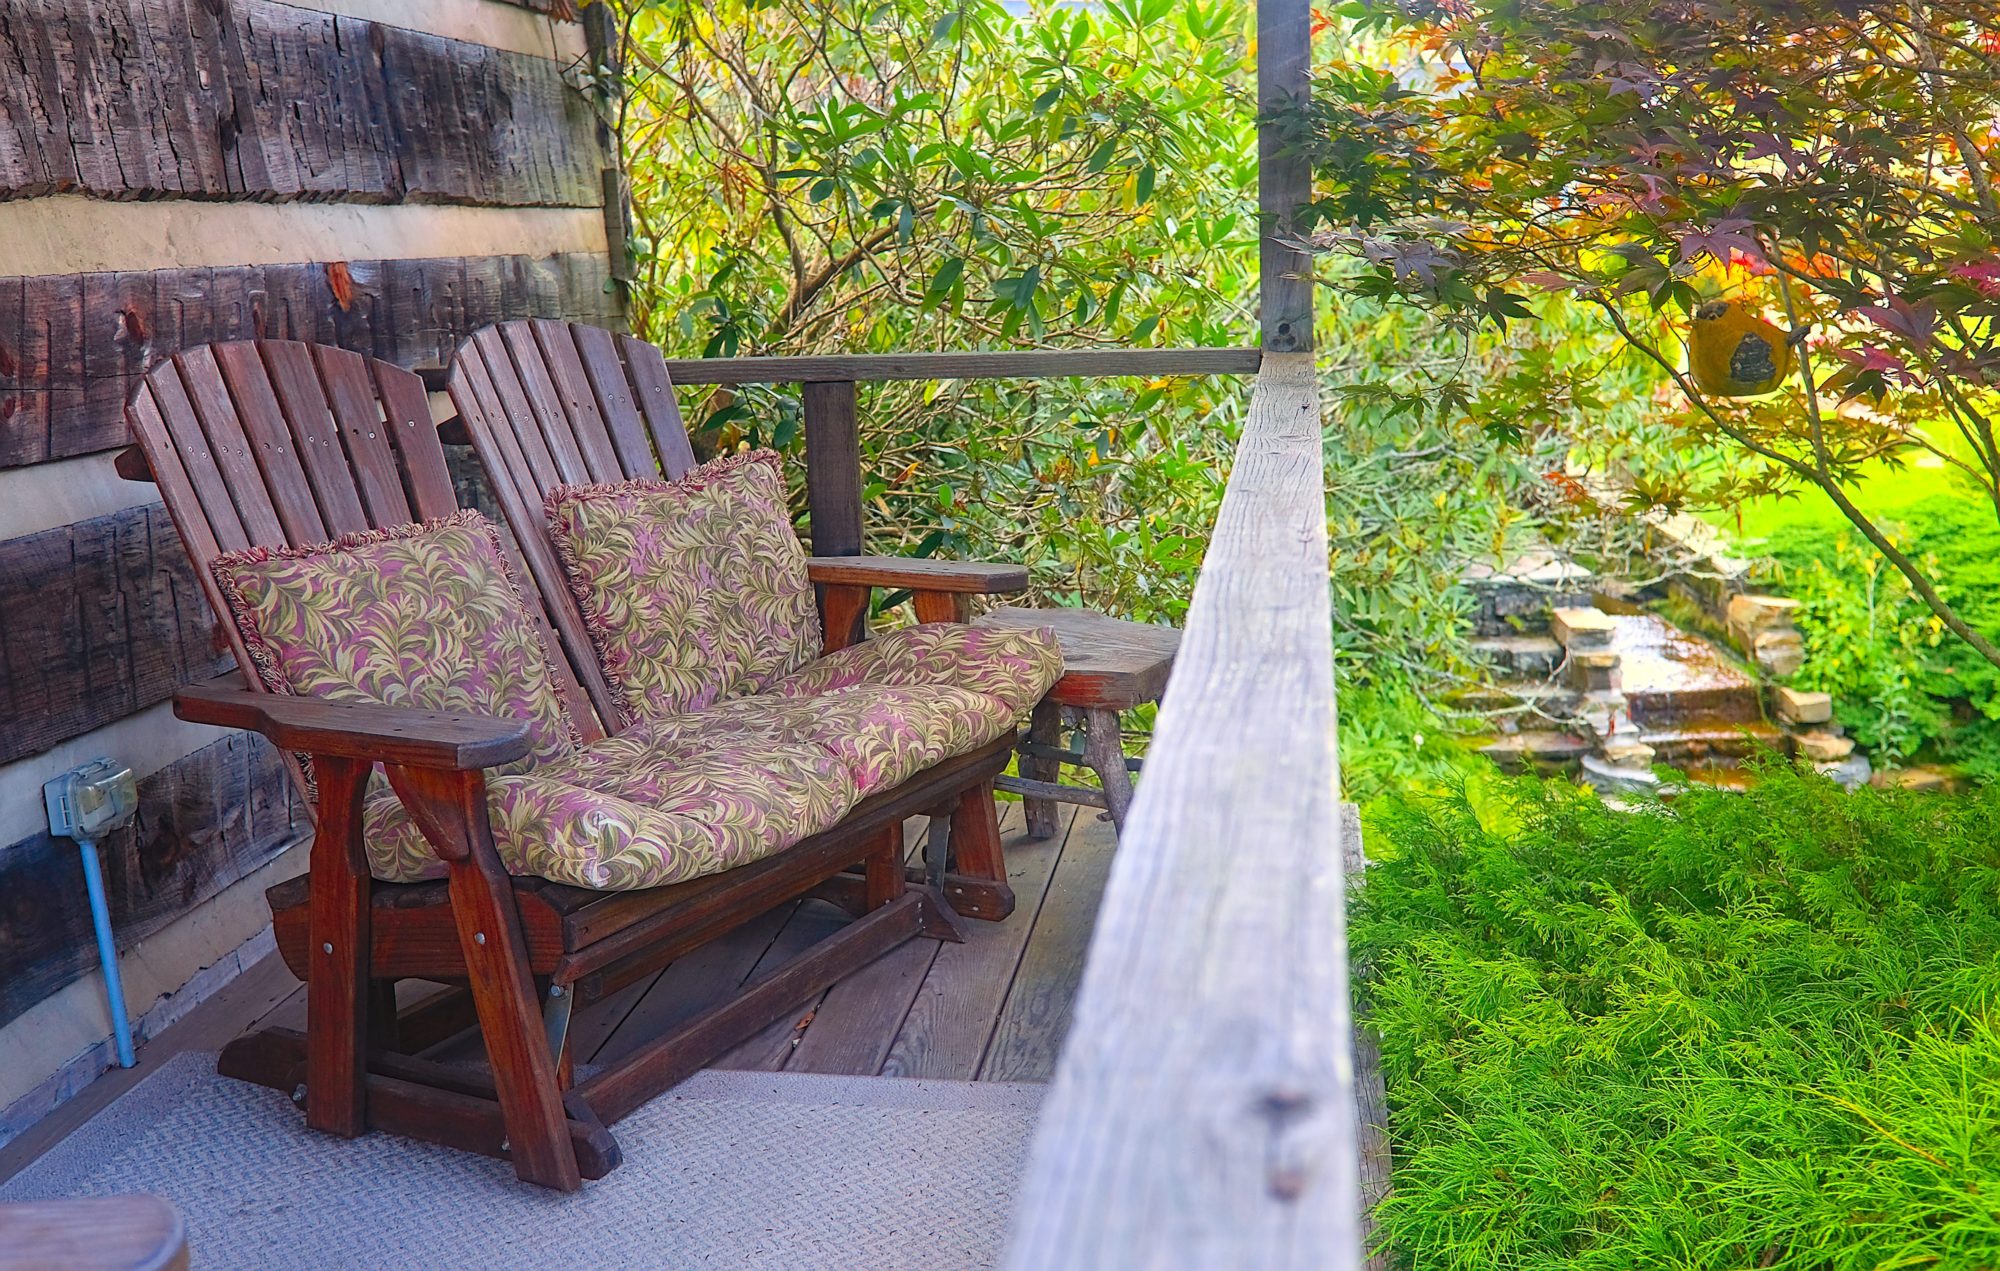 The back porch of the log cabin with a two-person glider chair